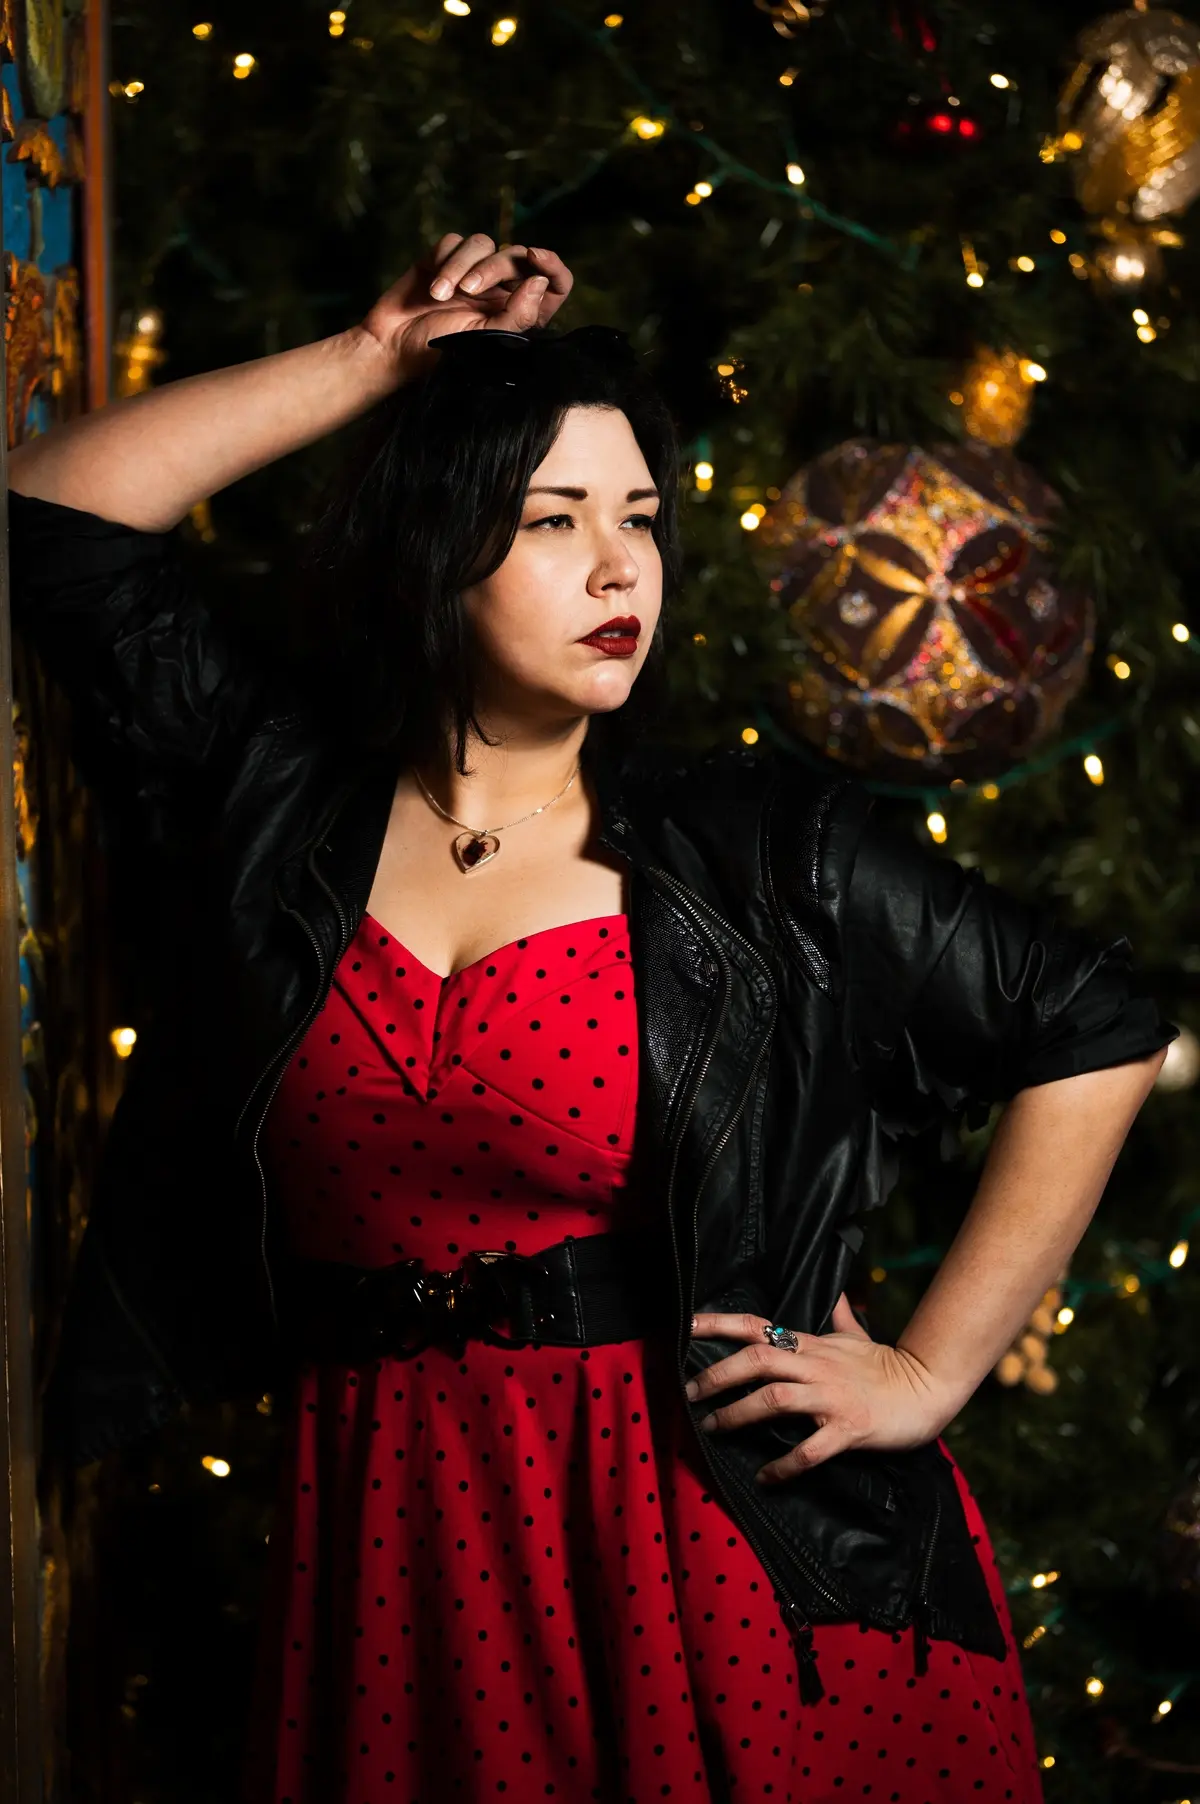 plus size woman wearing red and black polka dot dress matched with black leather jacket and belt